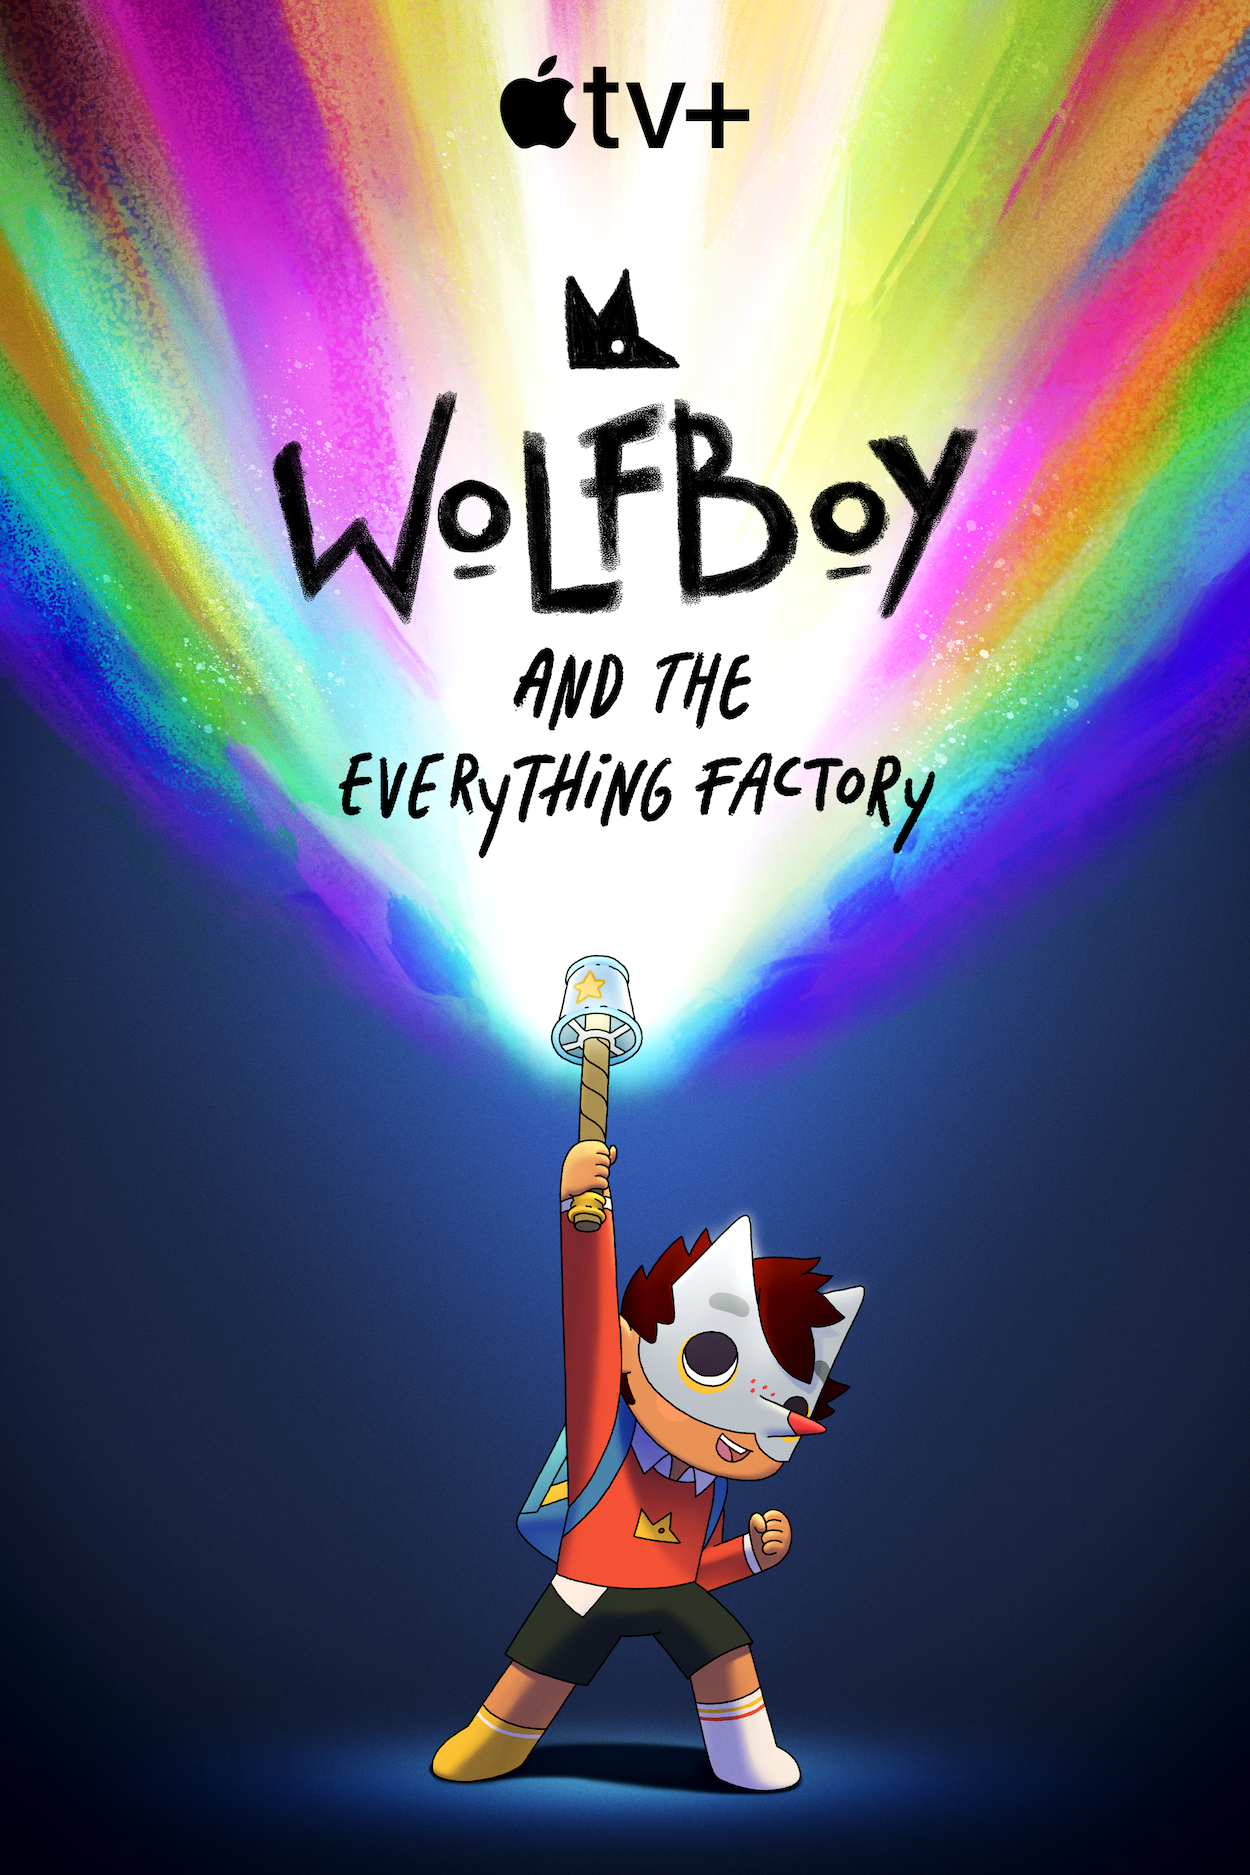 William Wolf and the Everything Factory from Apple TV+